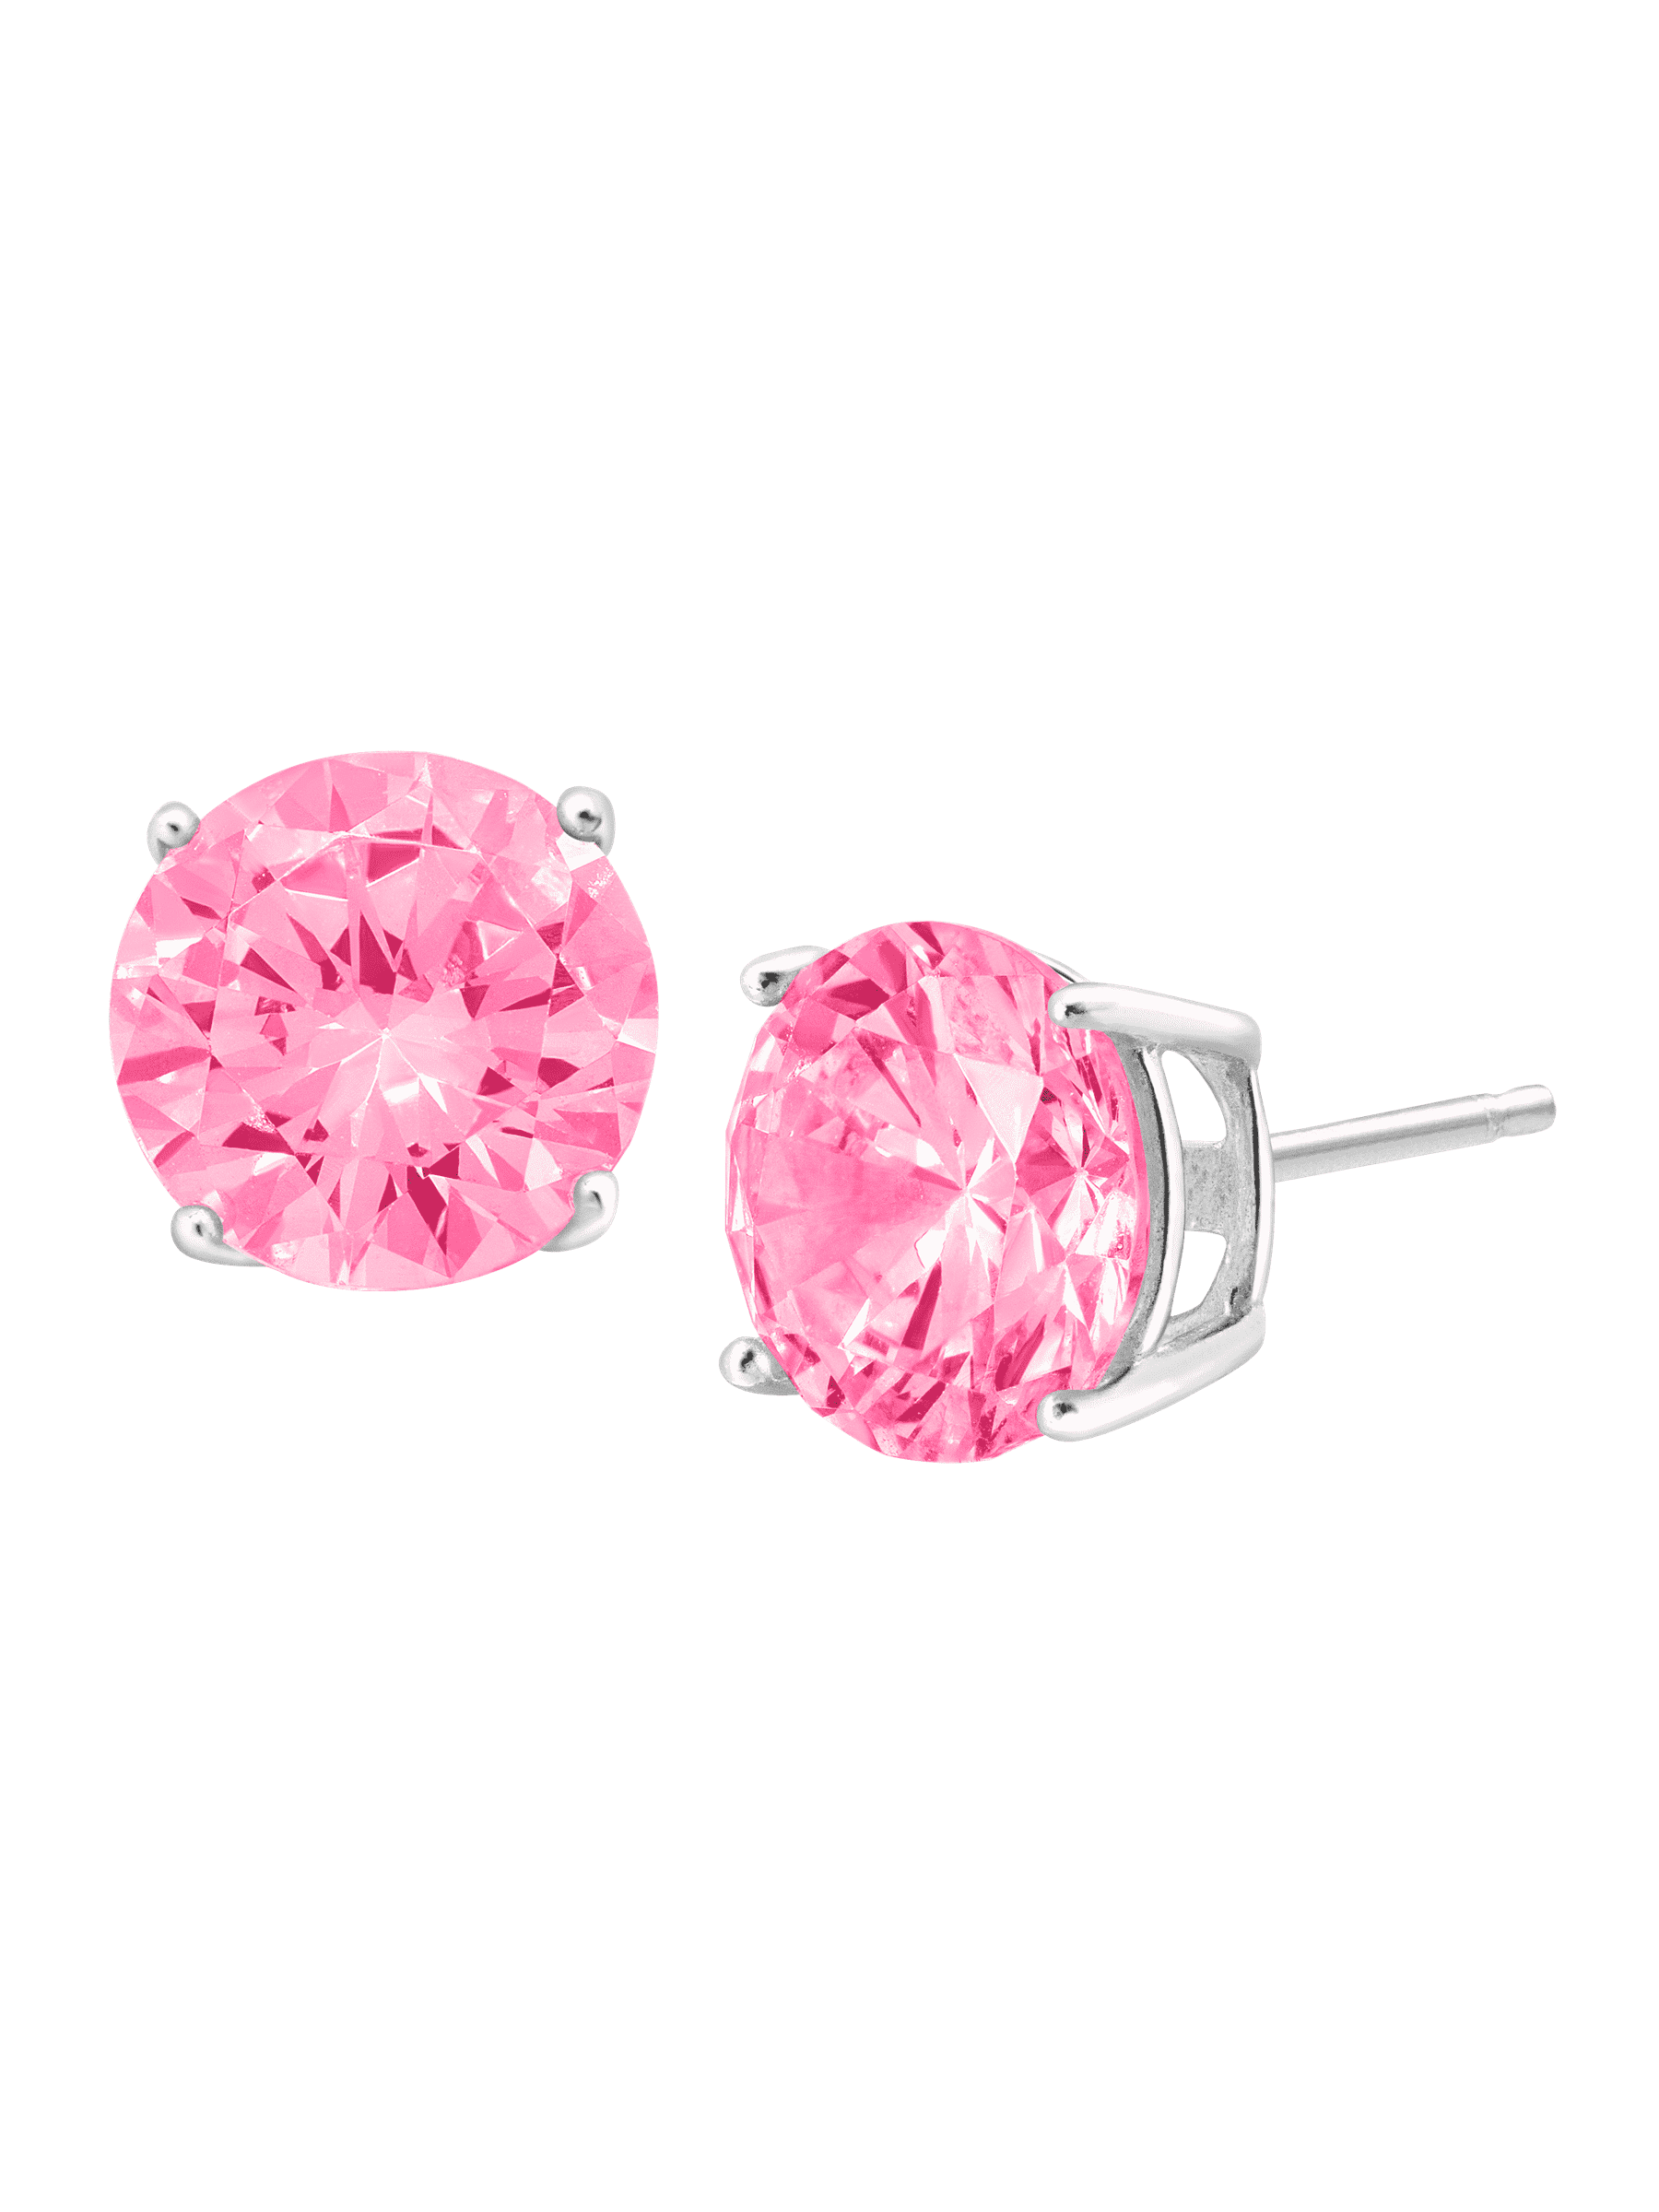 Details about   .925 Sterling Silver 12 MM Children's Pink White CZ Circle Dangle Stud Earrings 